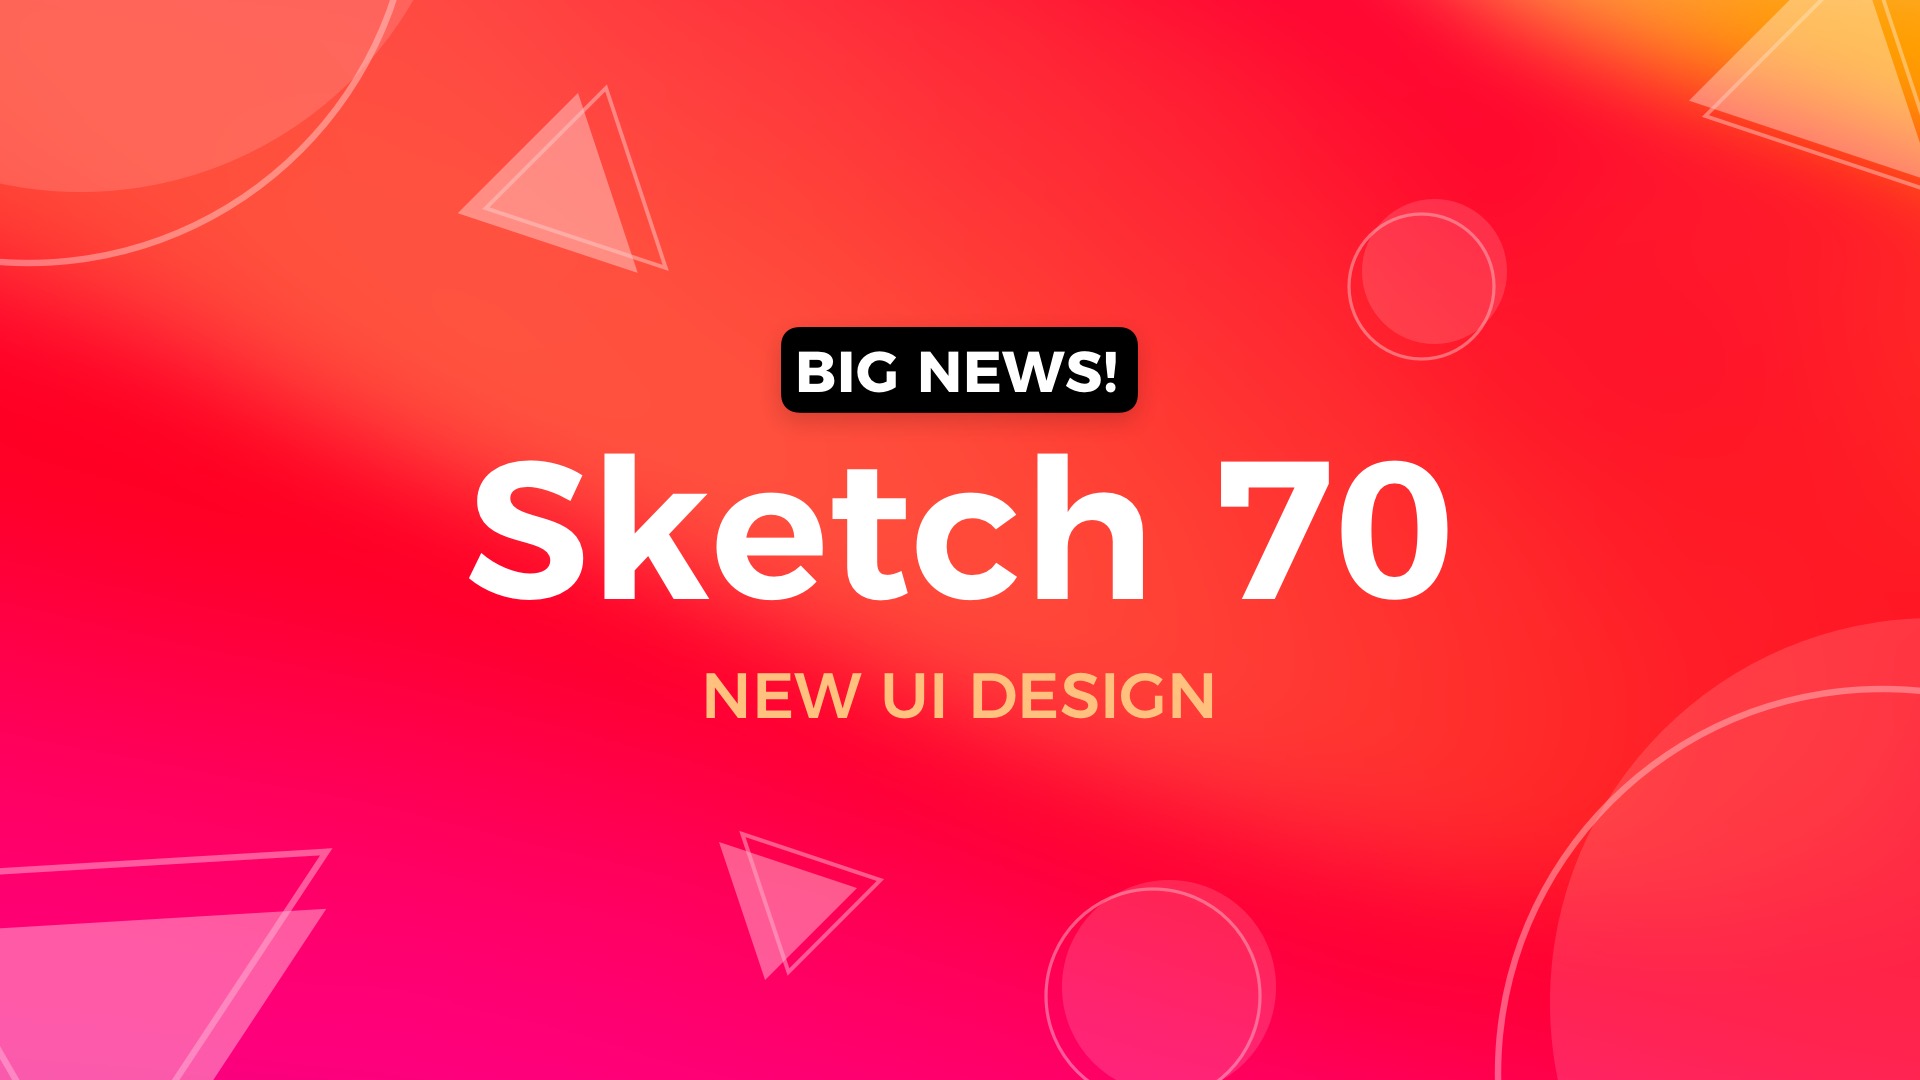 Sketch 70 featured